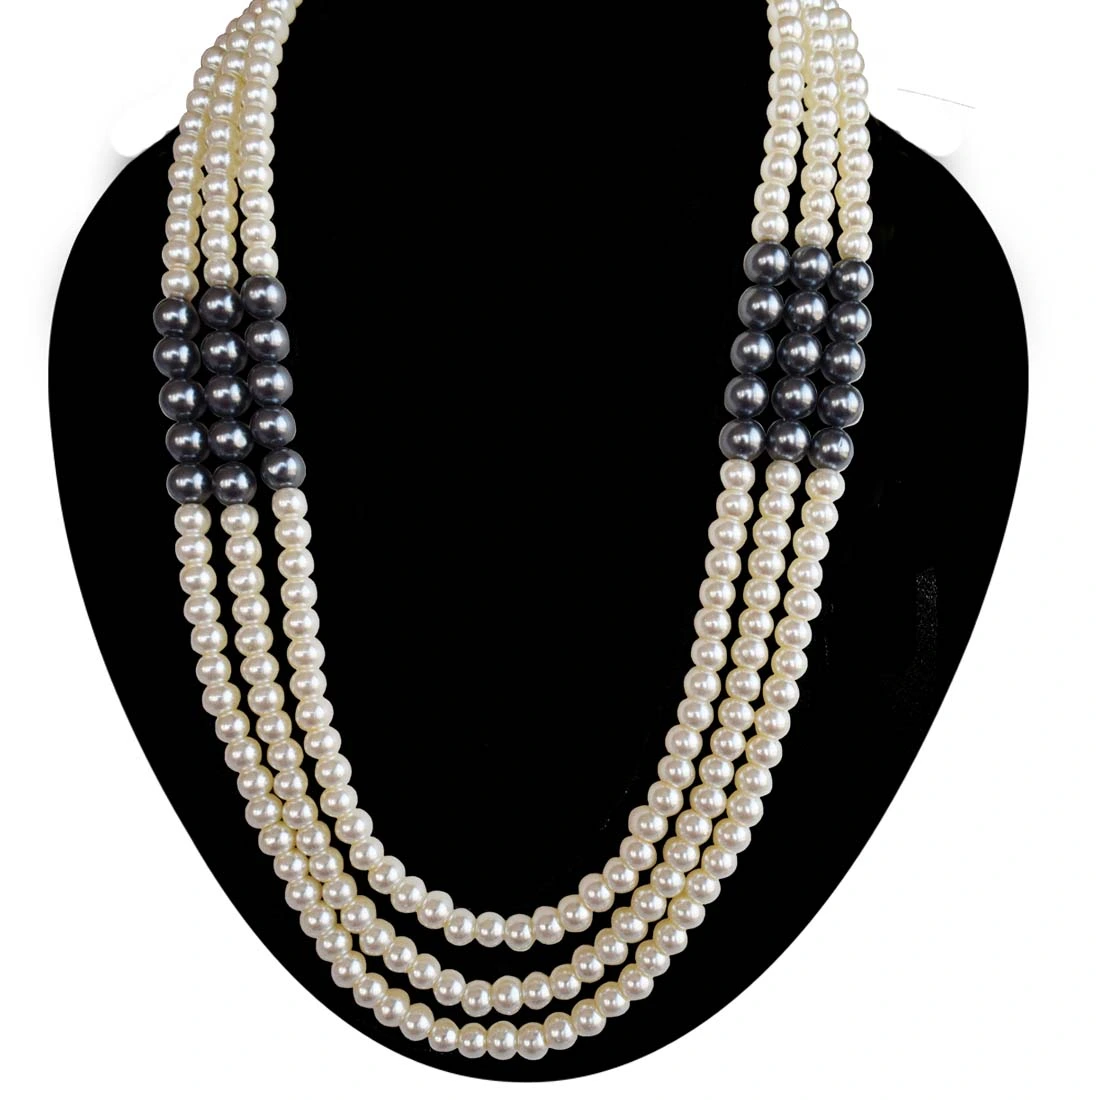 3 Line White & Gray Shell Pearl Necklace for Women (PS576)